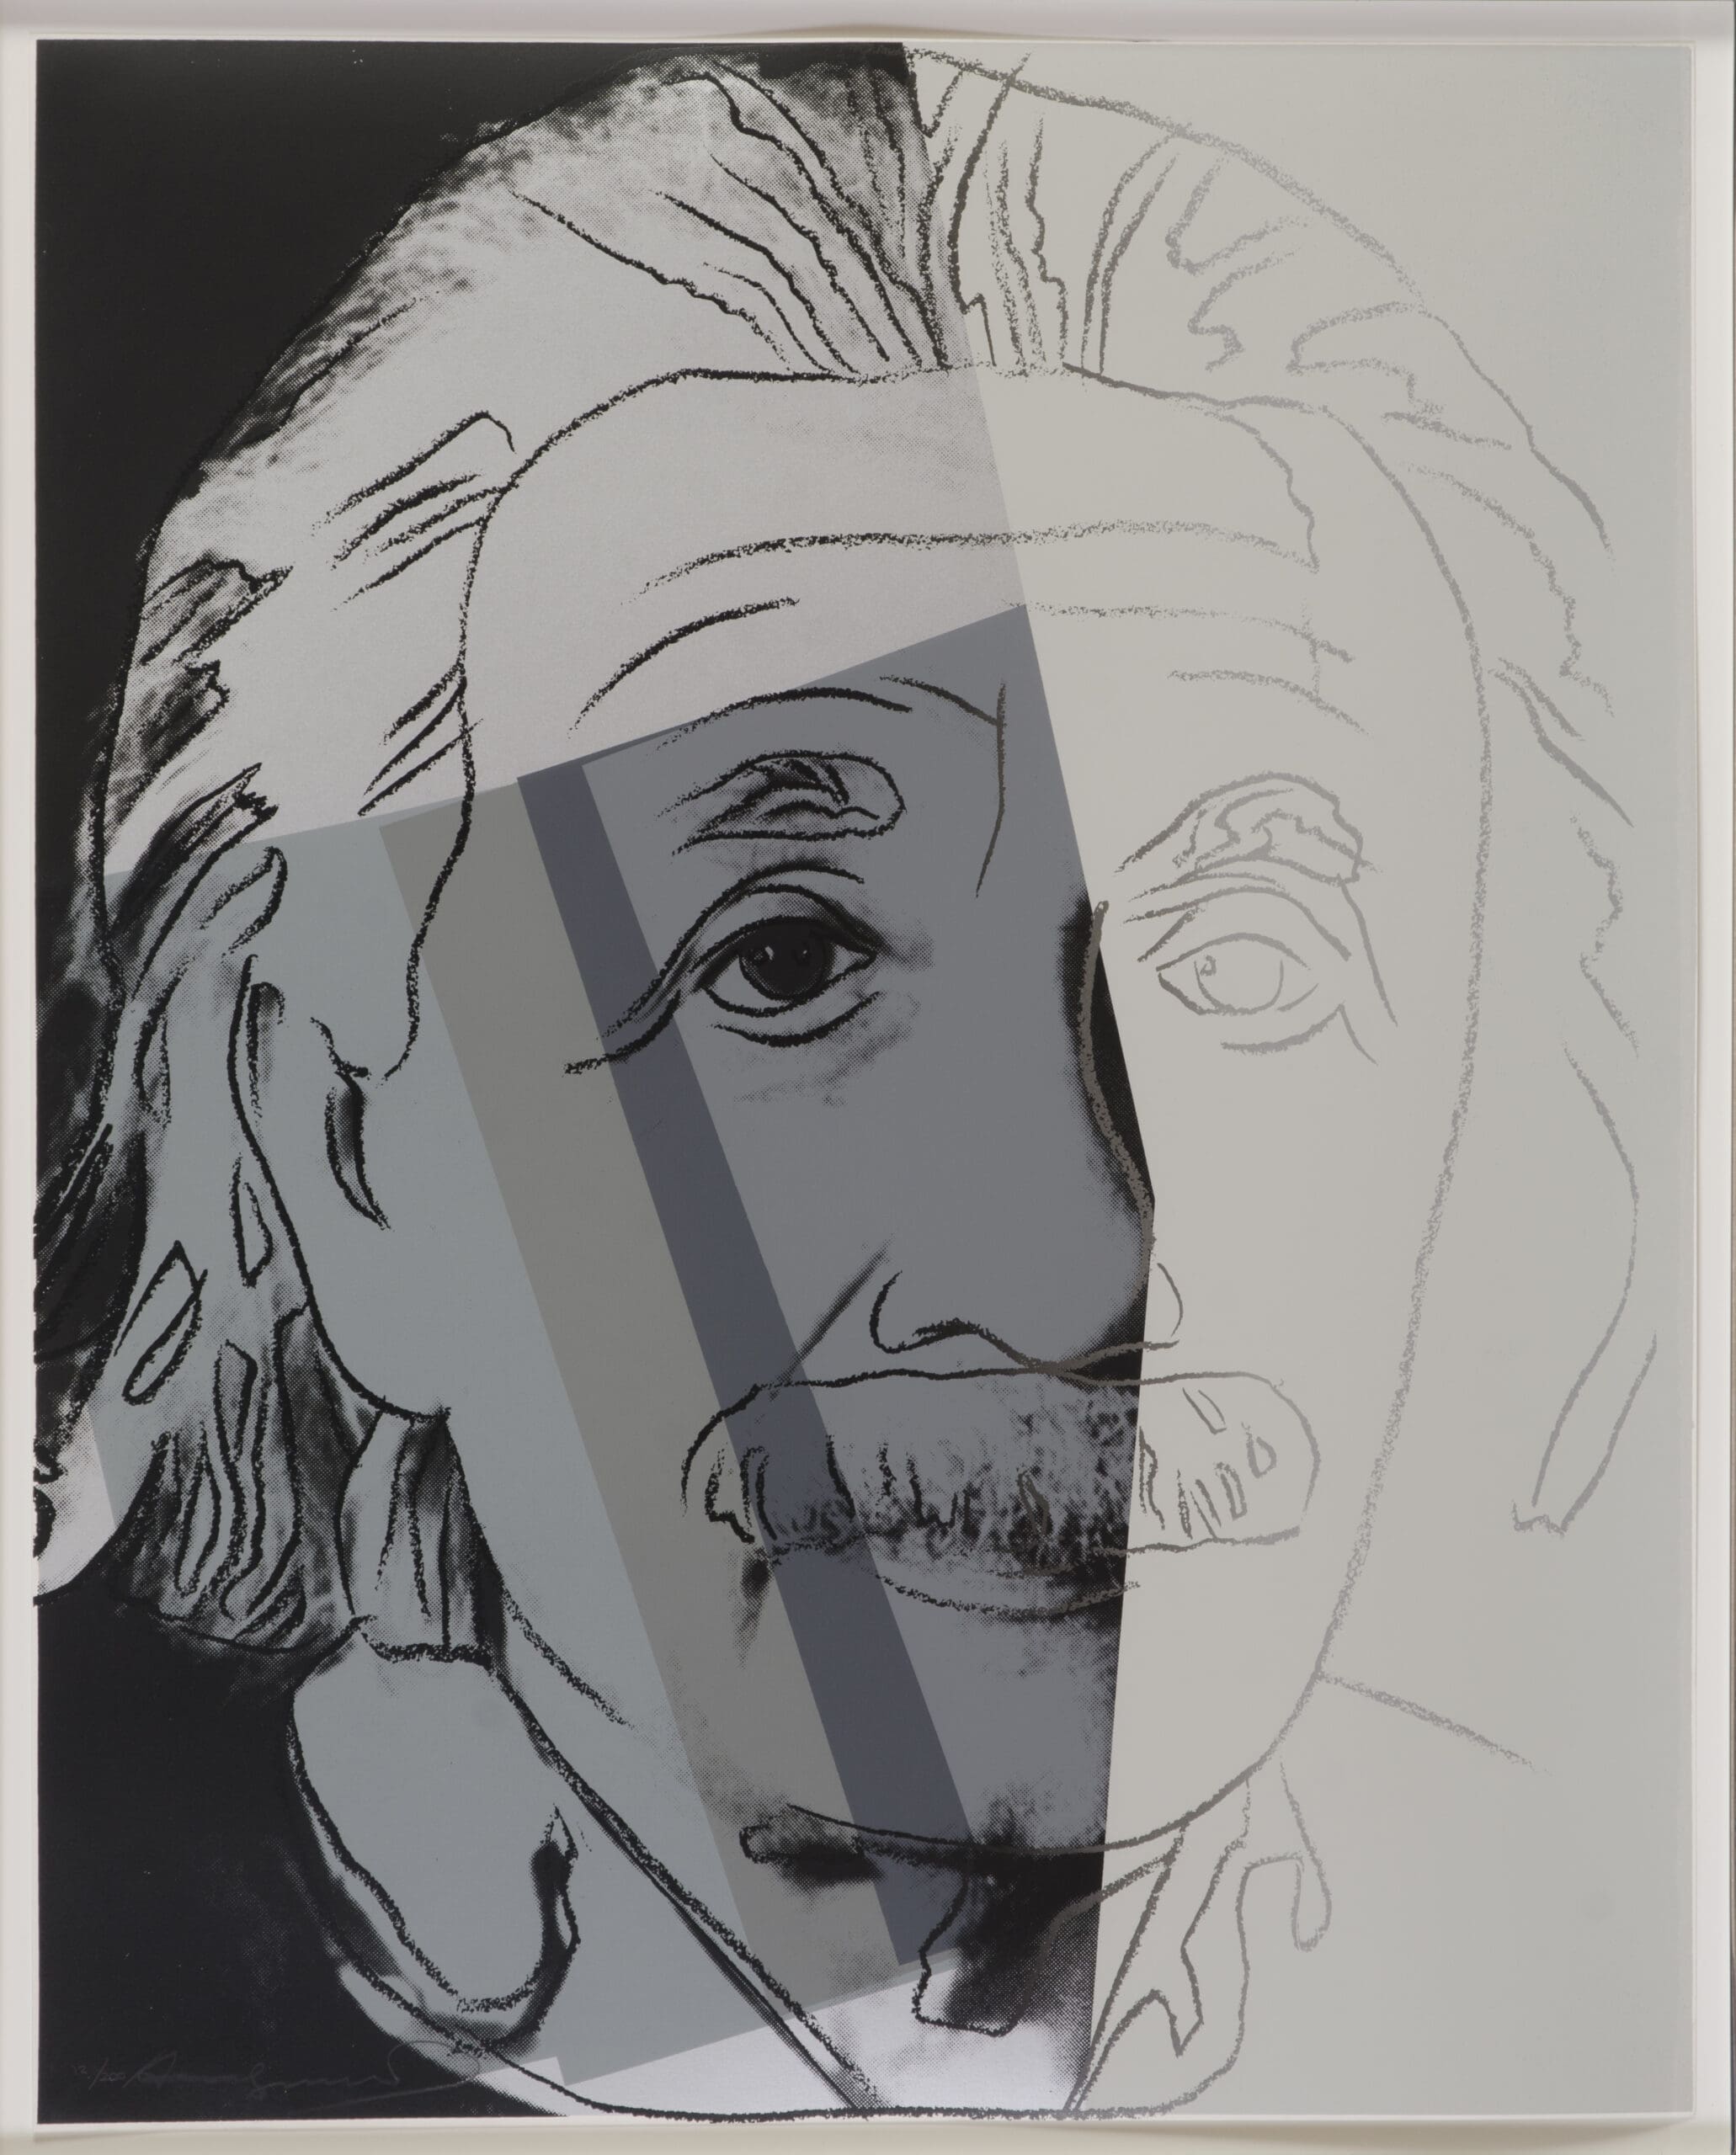 Andy Warhol. Albert Einstein, 1980. Collection of the Akron Art Museum. Gift of the estate of Clifford and Judith Isroff 2015.23